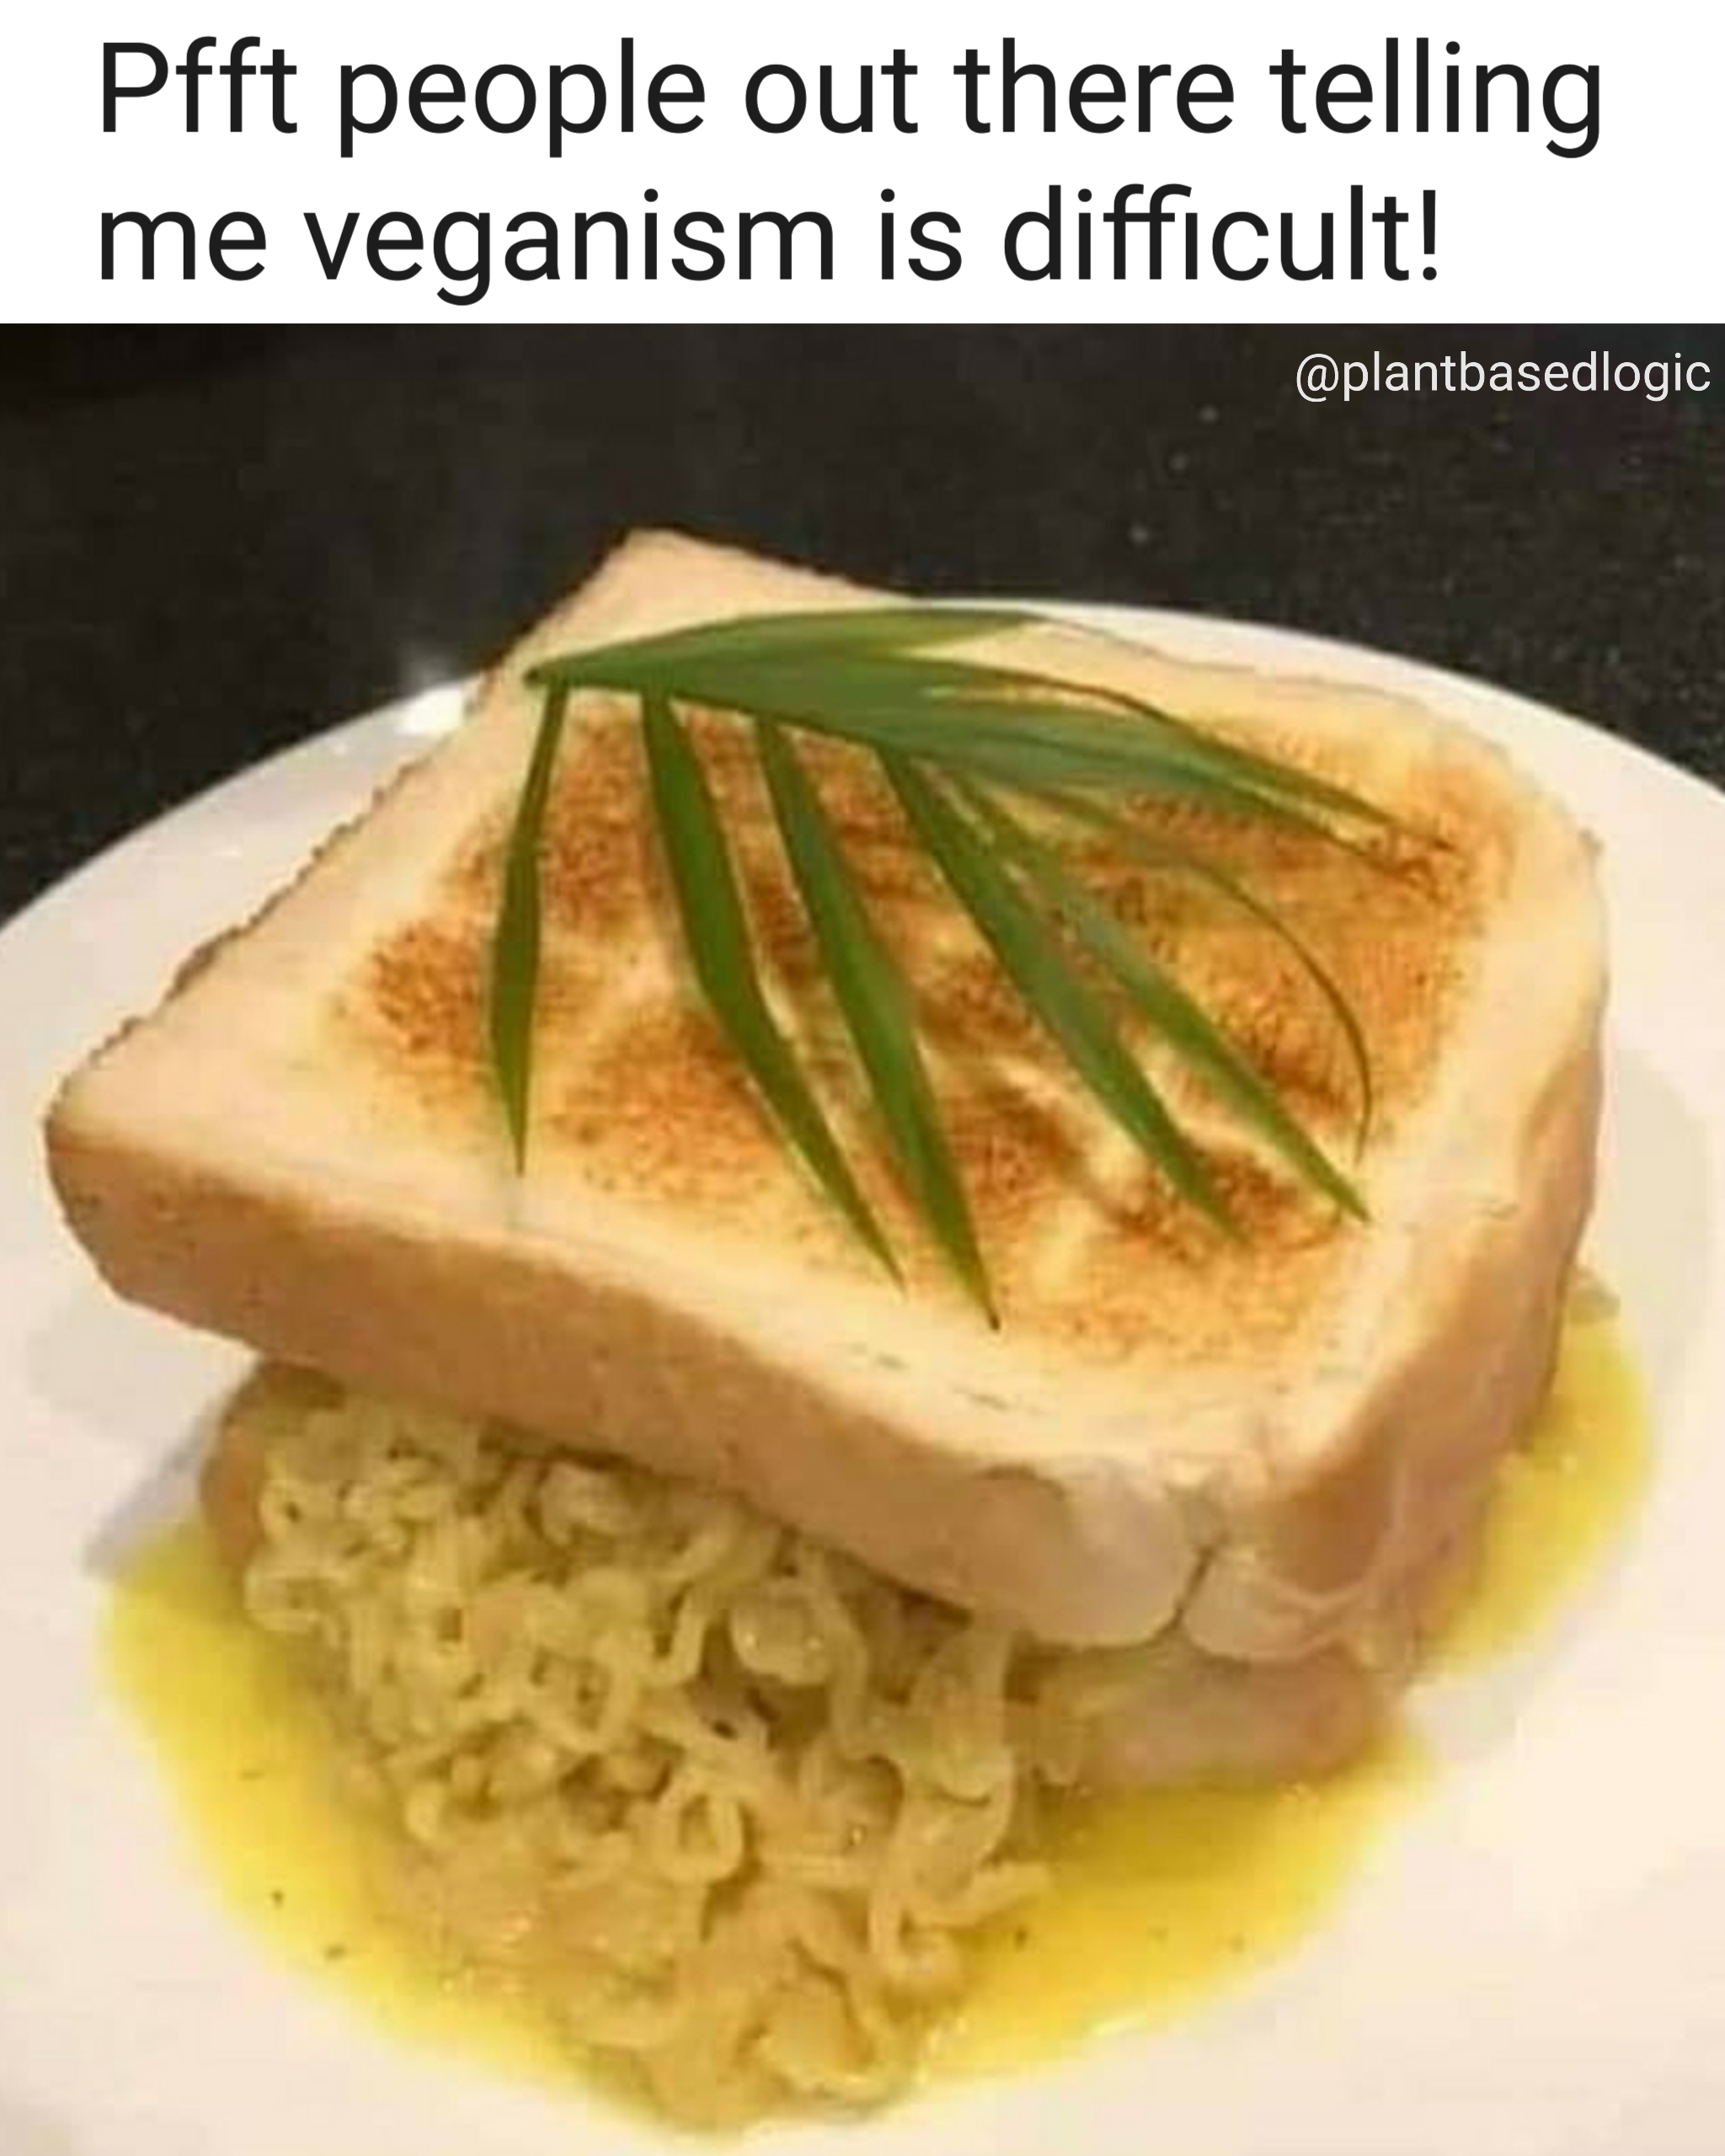 dish - Pfft people out there telling me veganism is difficult!